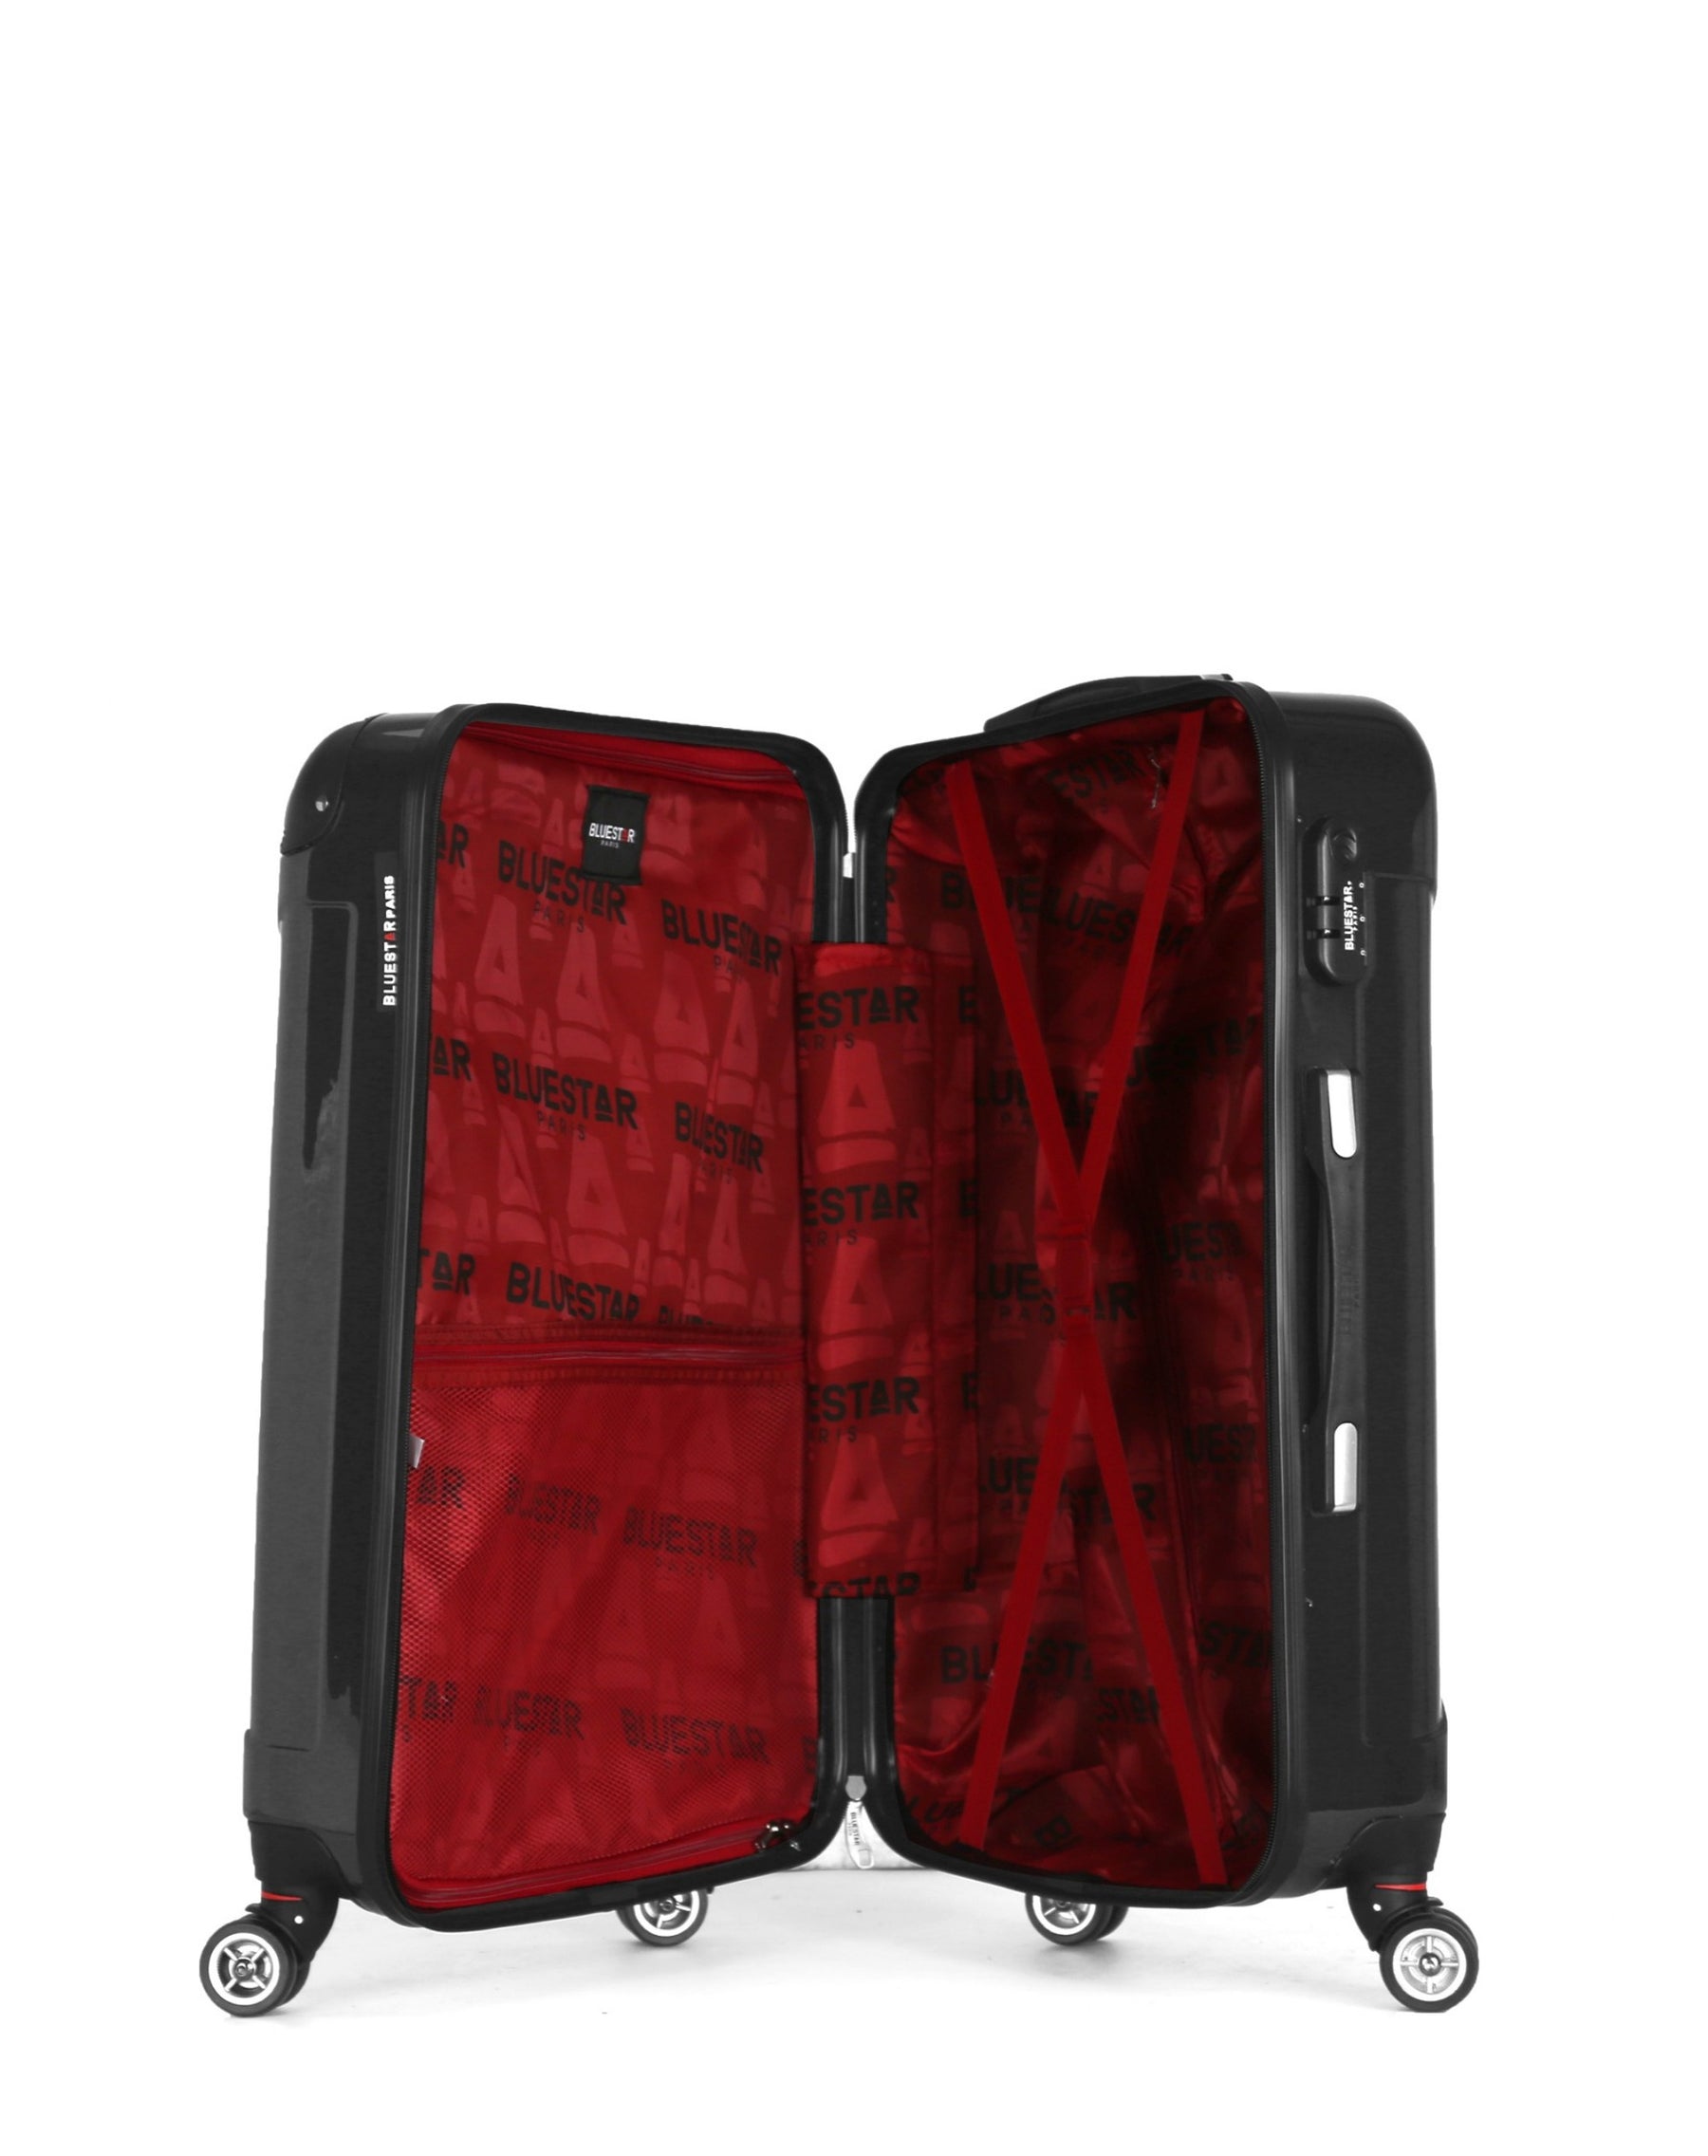 Valise TUNIS Taille moyenne 65cm